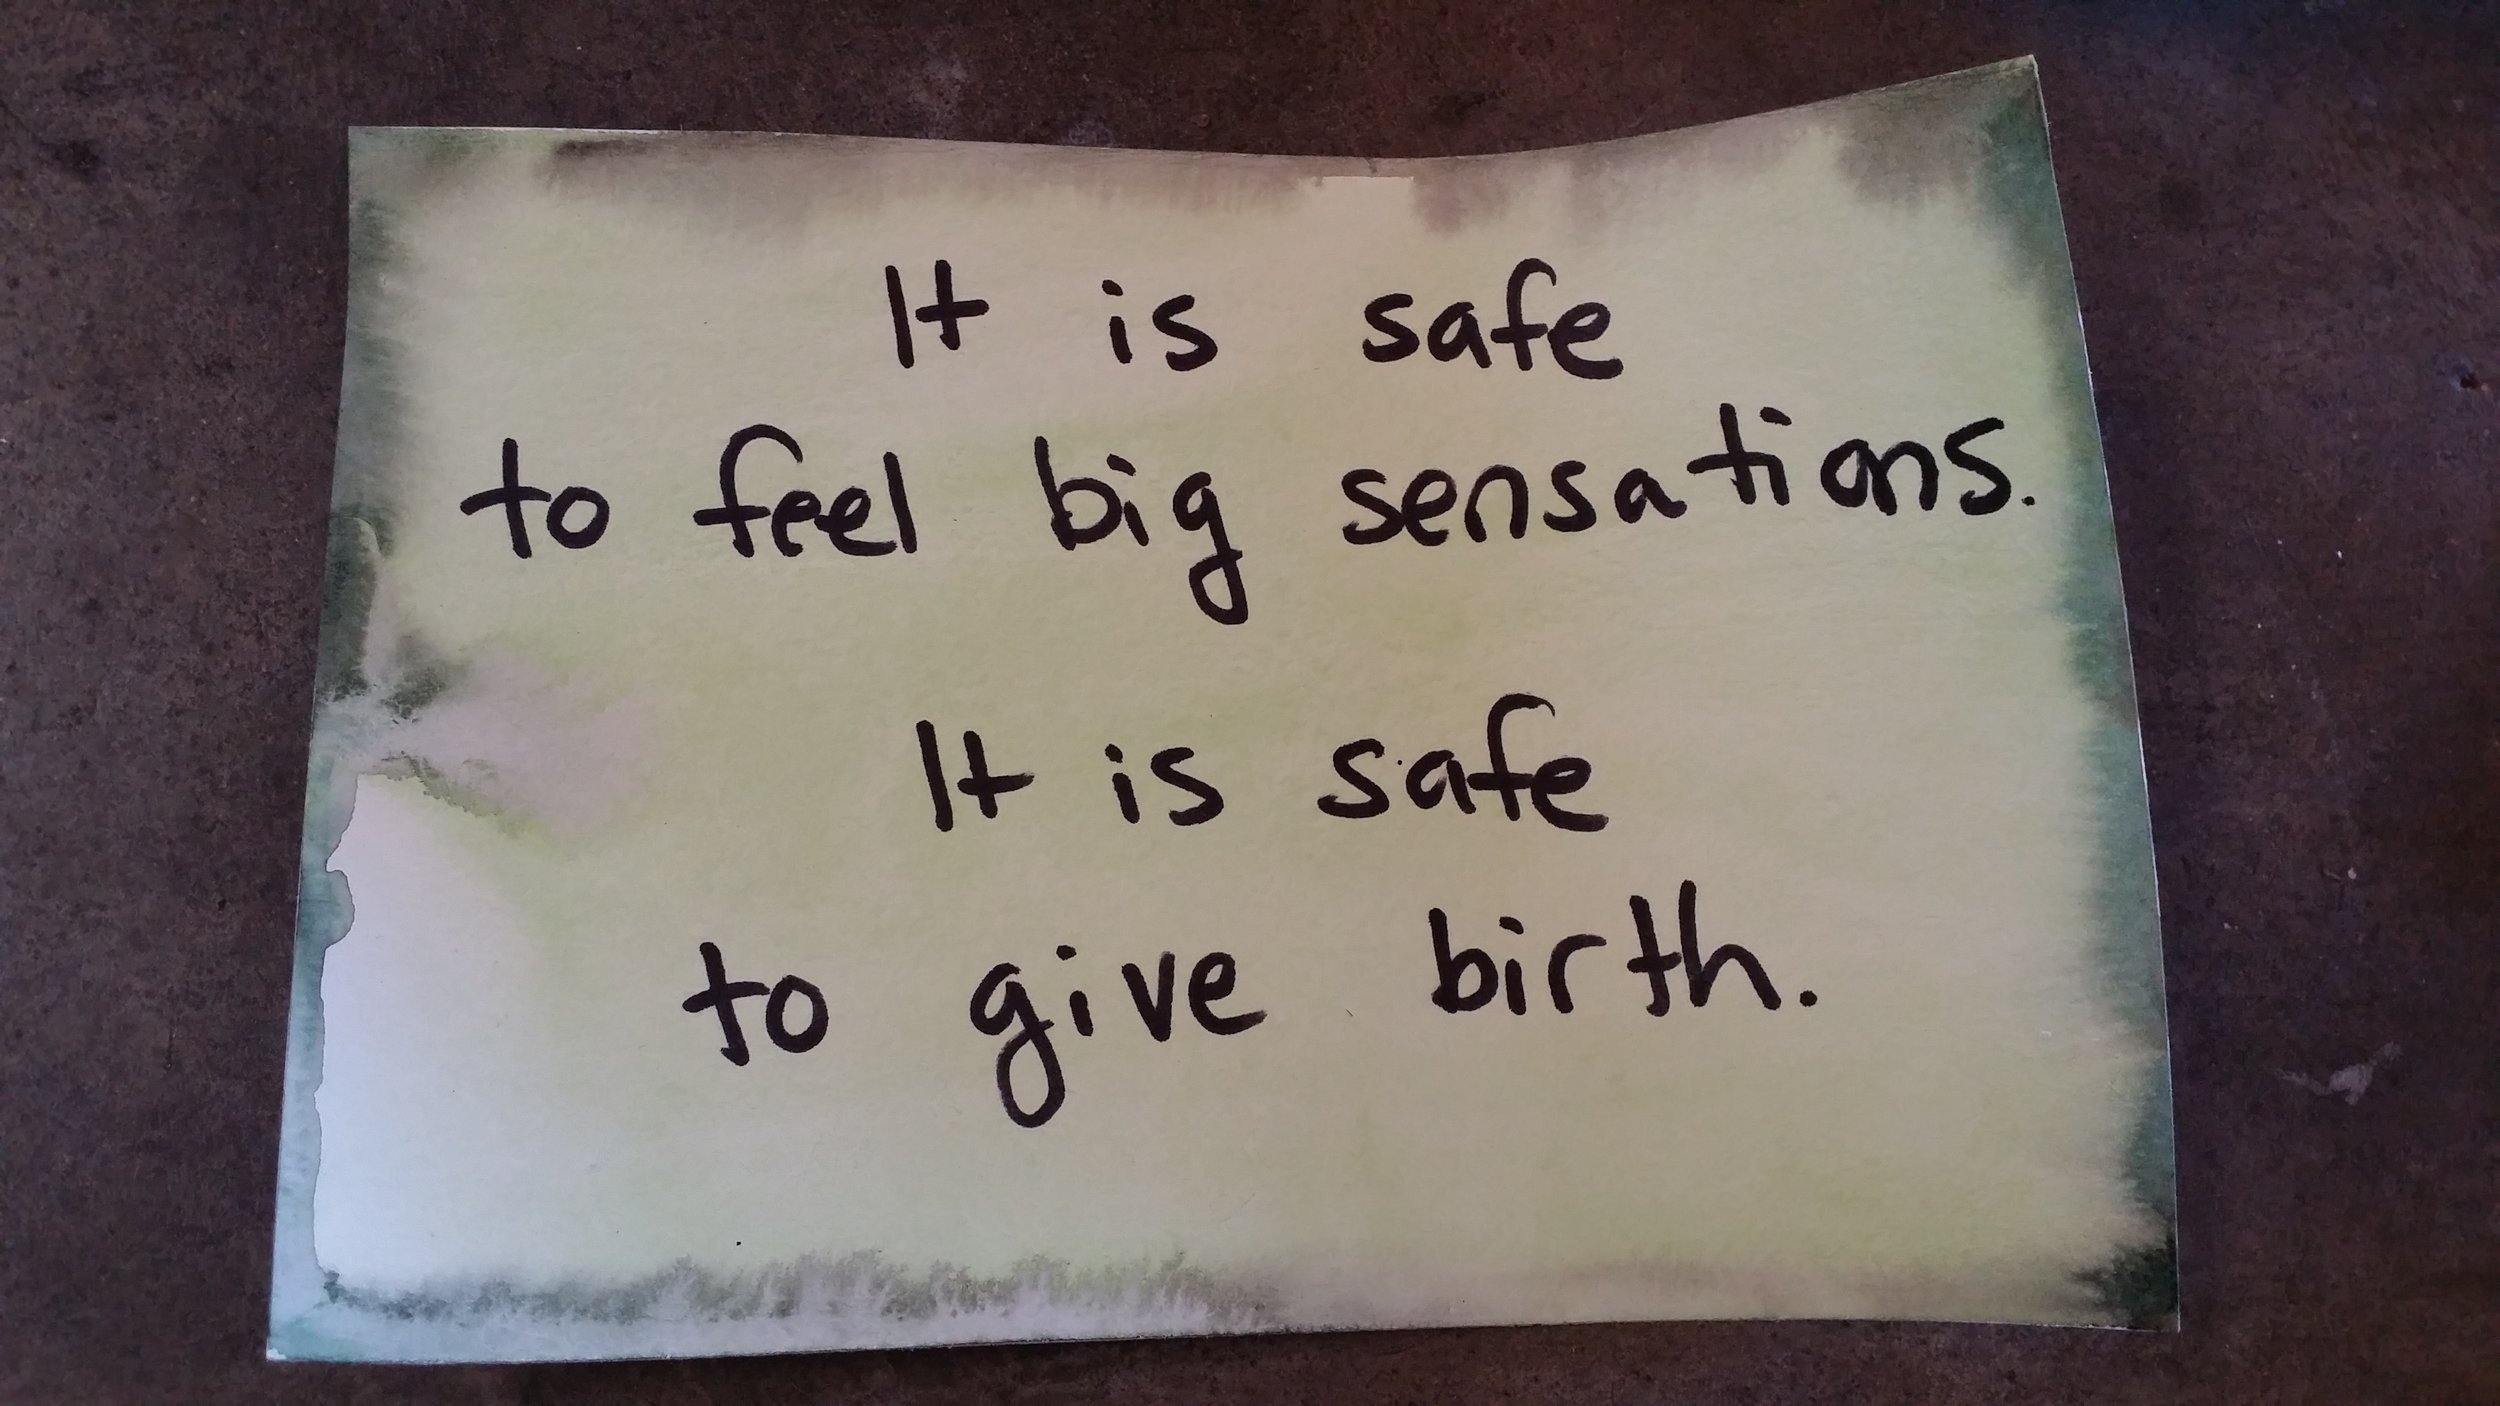 It is safe to feel big sensations. It is safe to give birth.